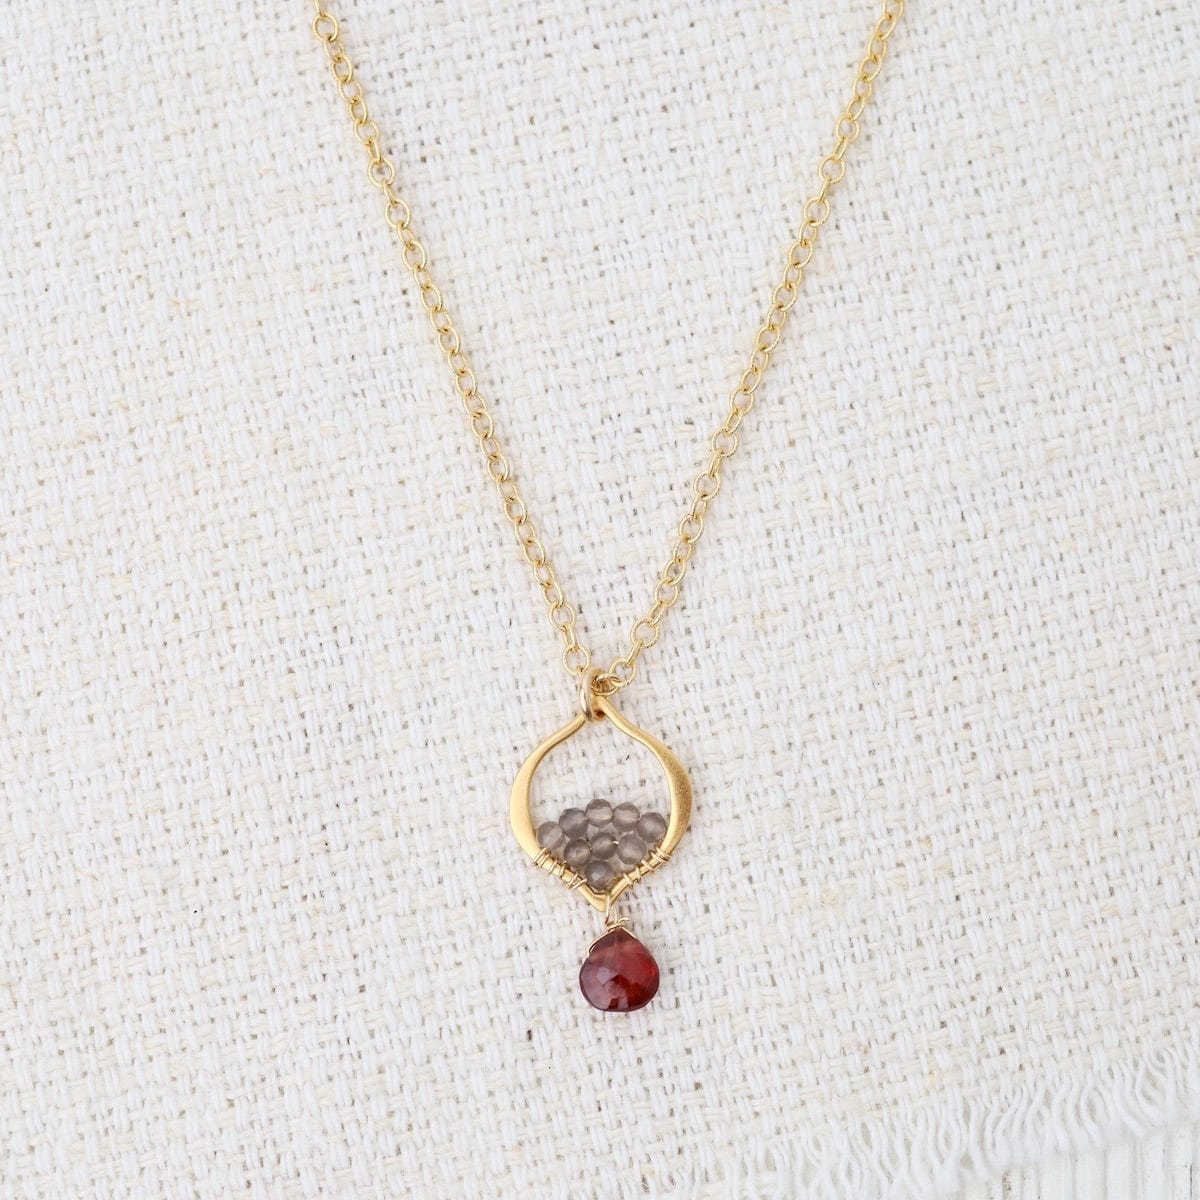 NKL-VRM Tiny Arabesque Necklace with Garnet, gray moonston